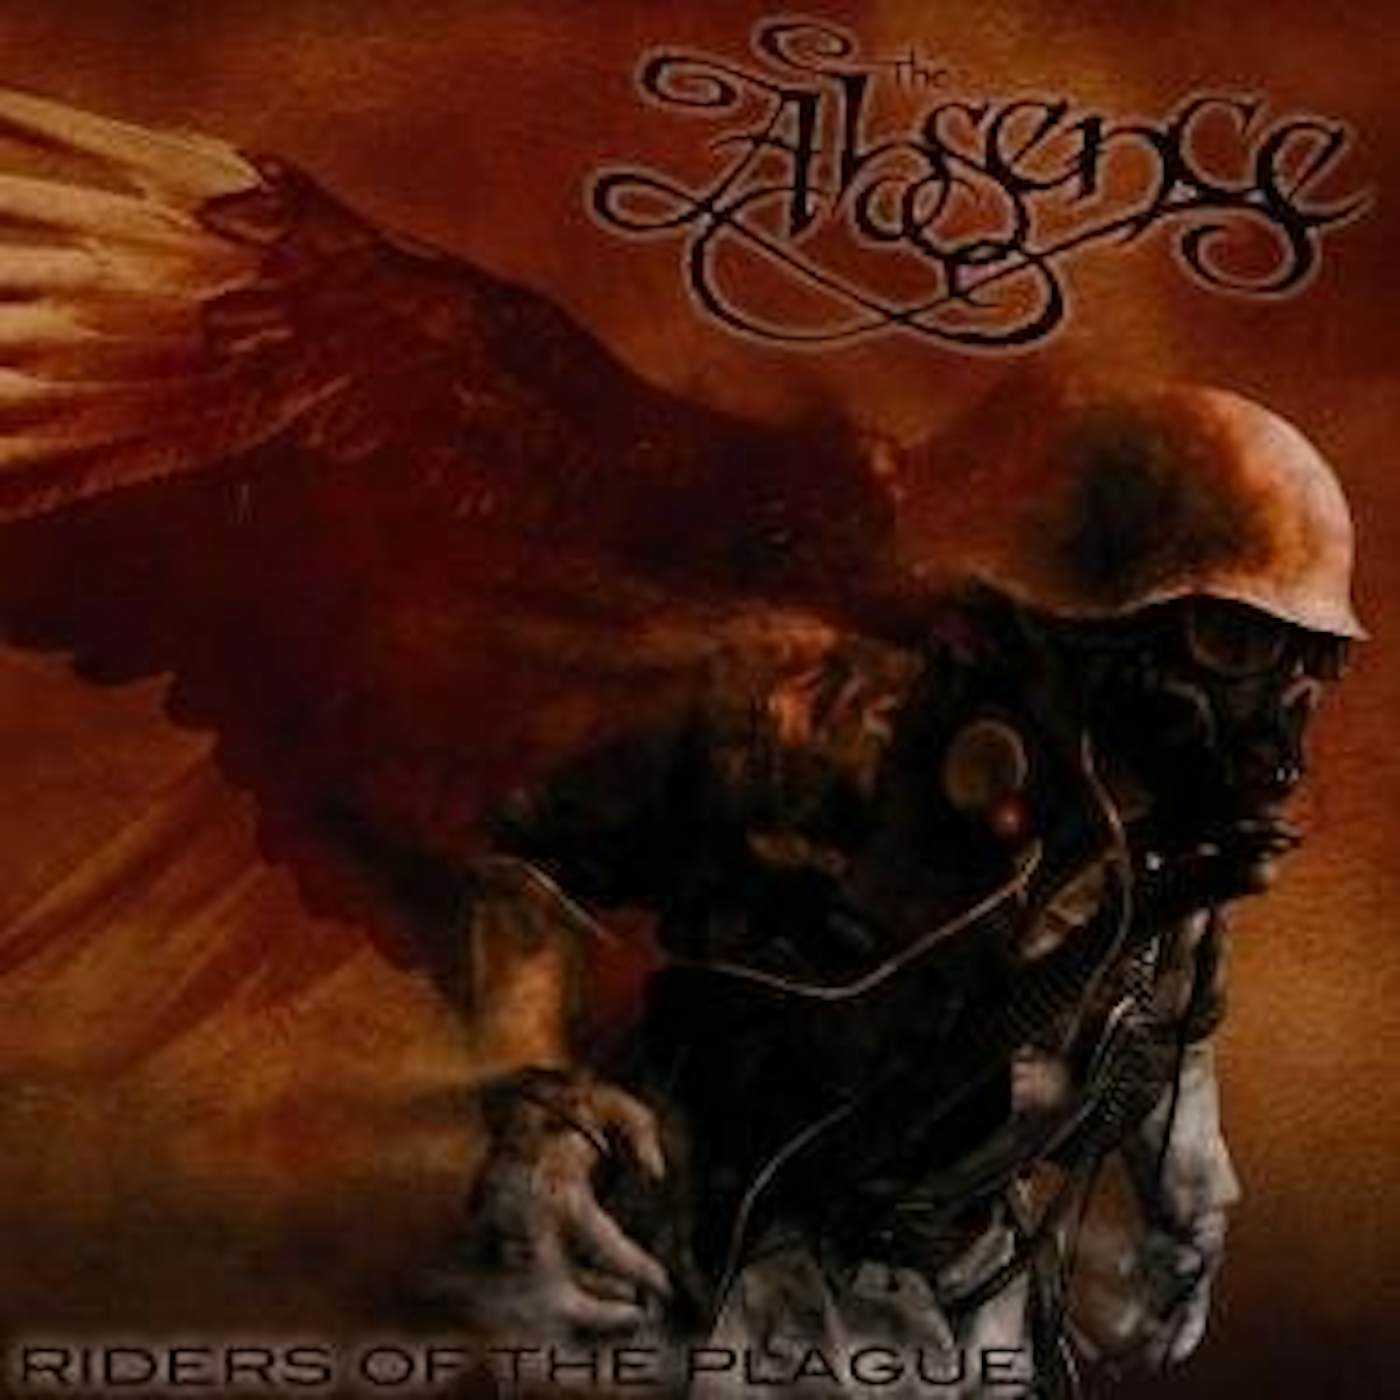 The Absence RIDERS OF THE PLAGUE CD